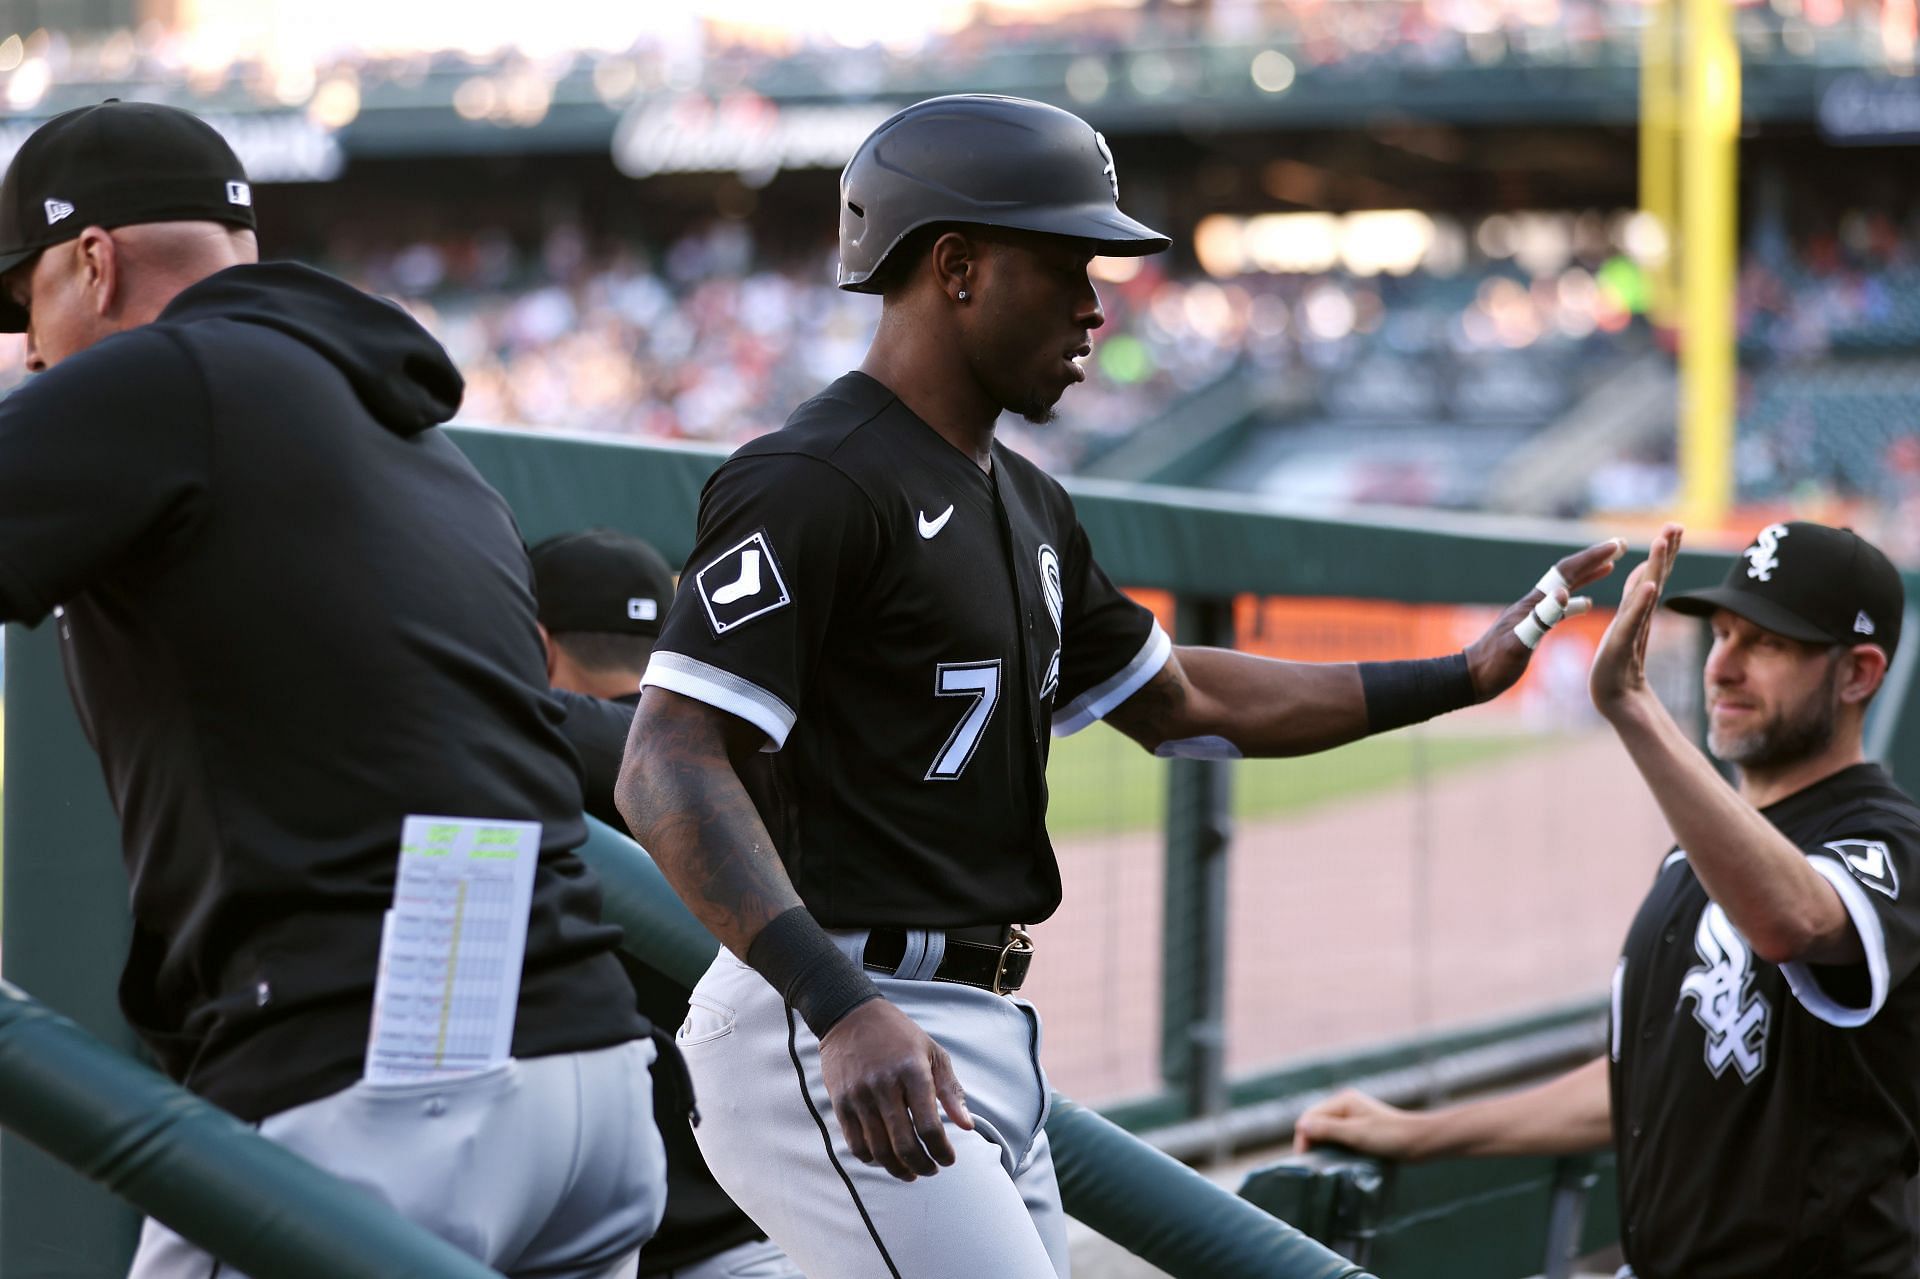 Who is Tim Anderson's wife, Bria Anderson? A glimpse into the personal life  of White Sox star